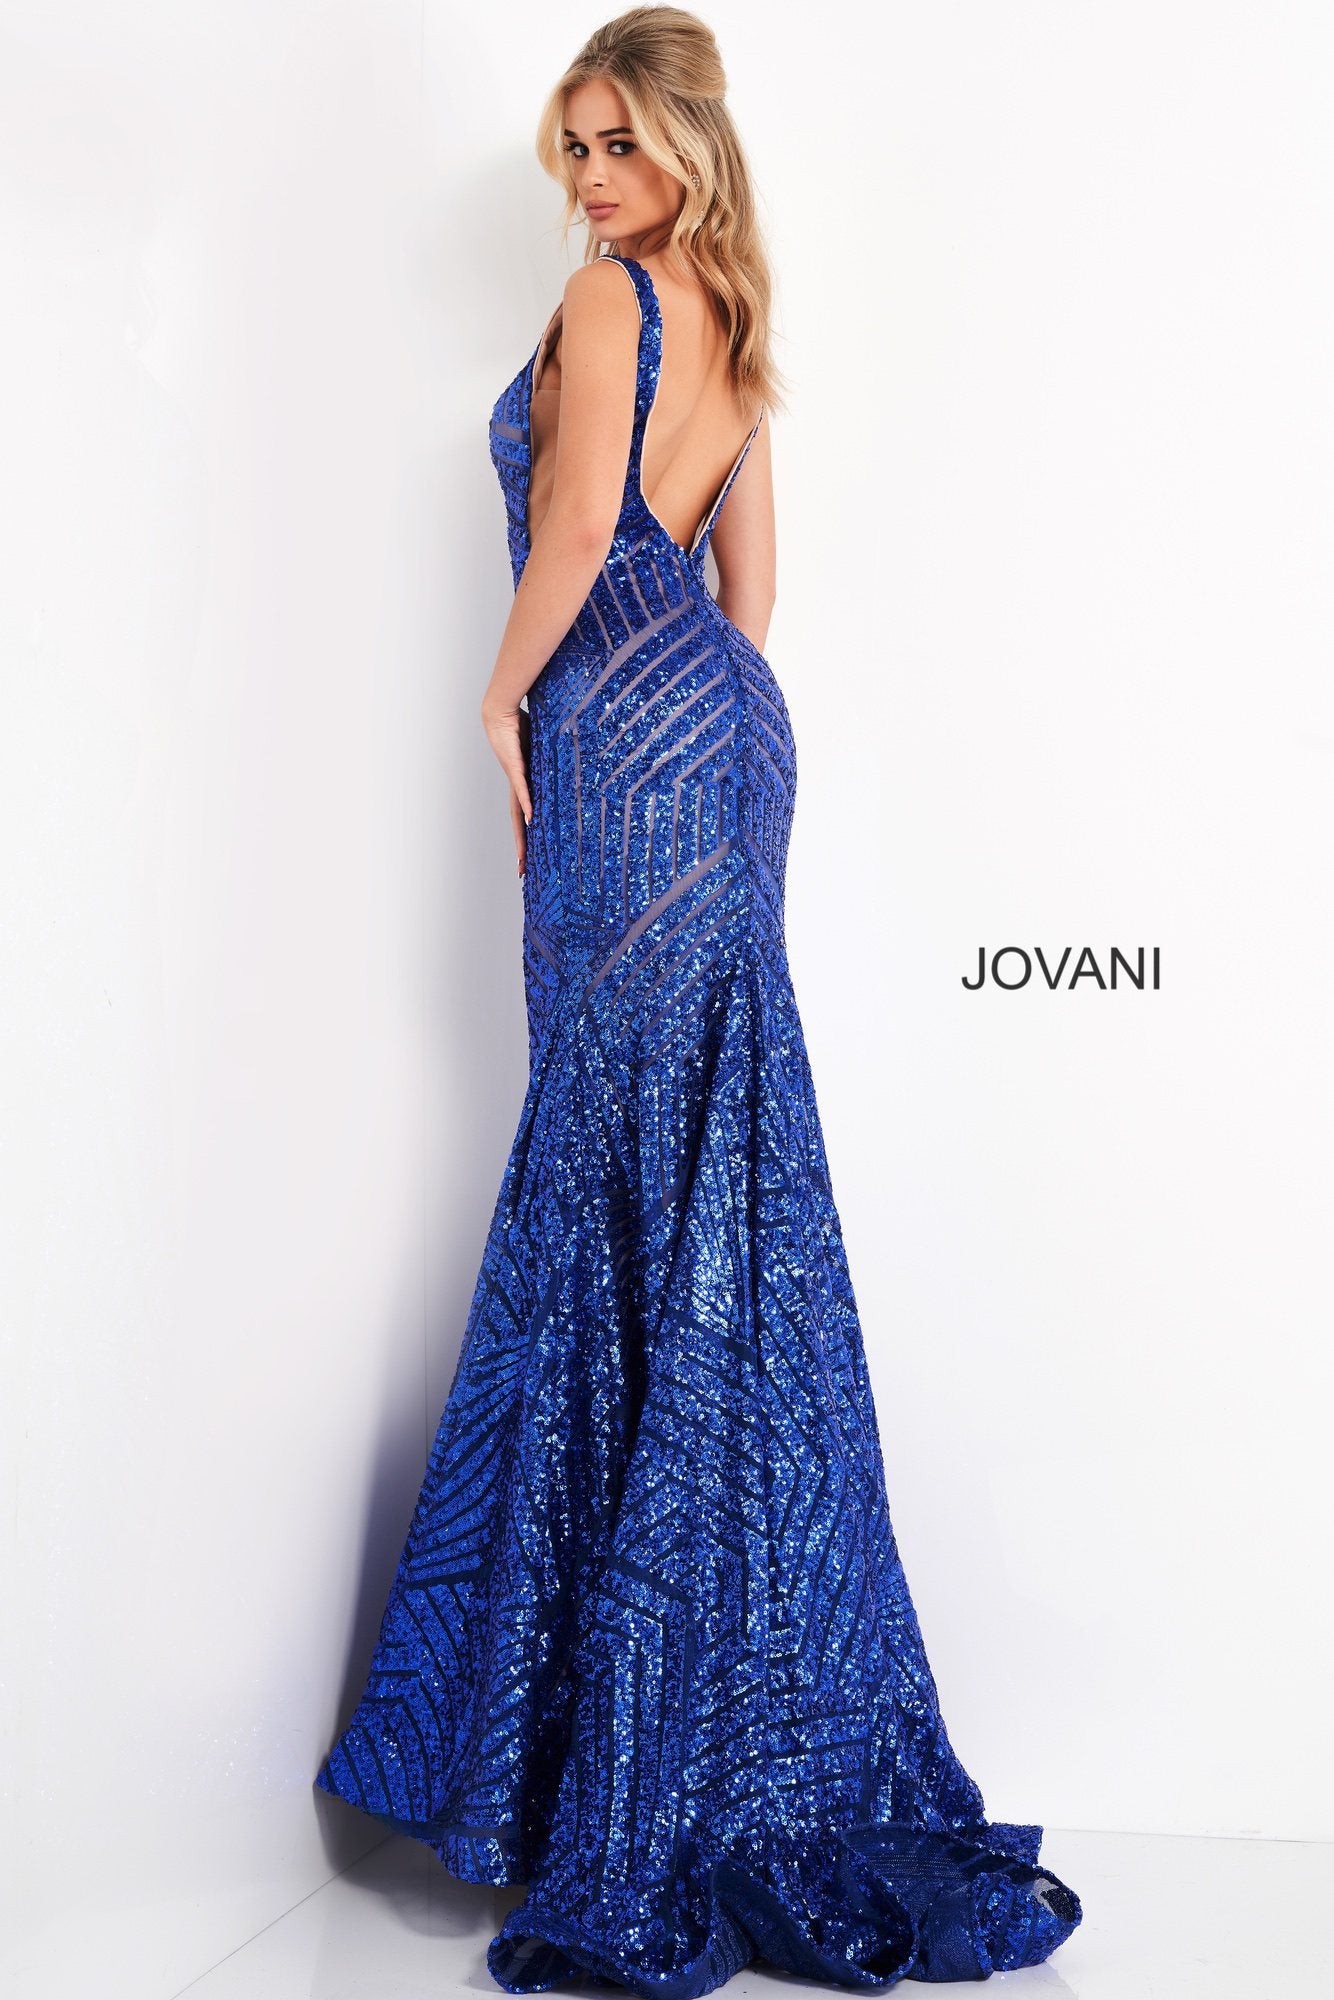 Jovani 59762 Sequin Embellished Mermaid Prom Dress Pageant Gown plunging neckline